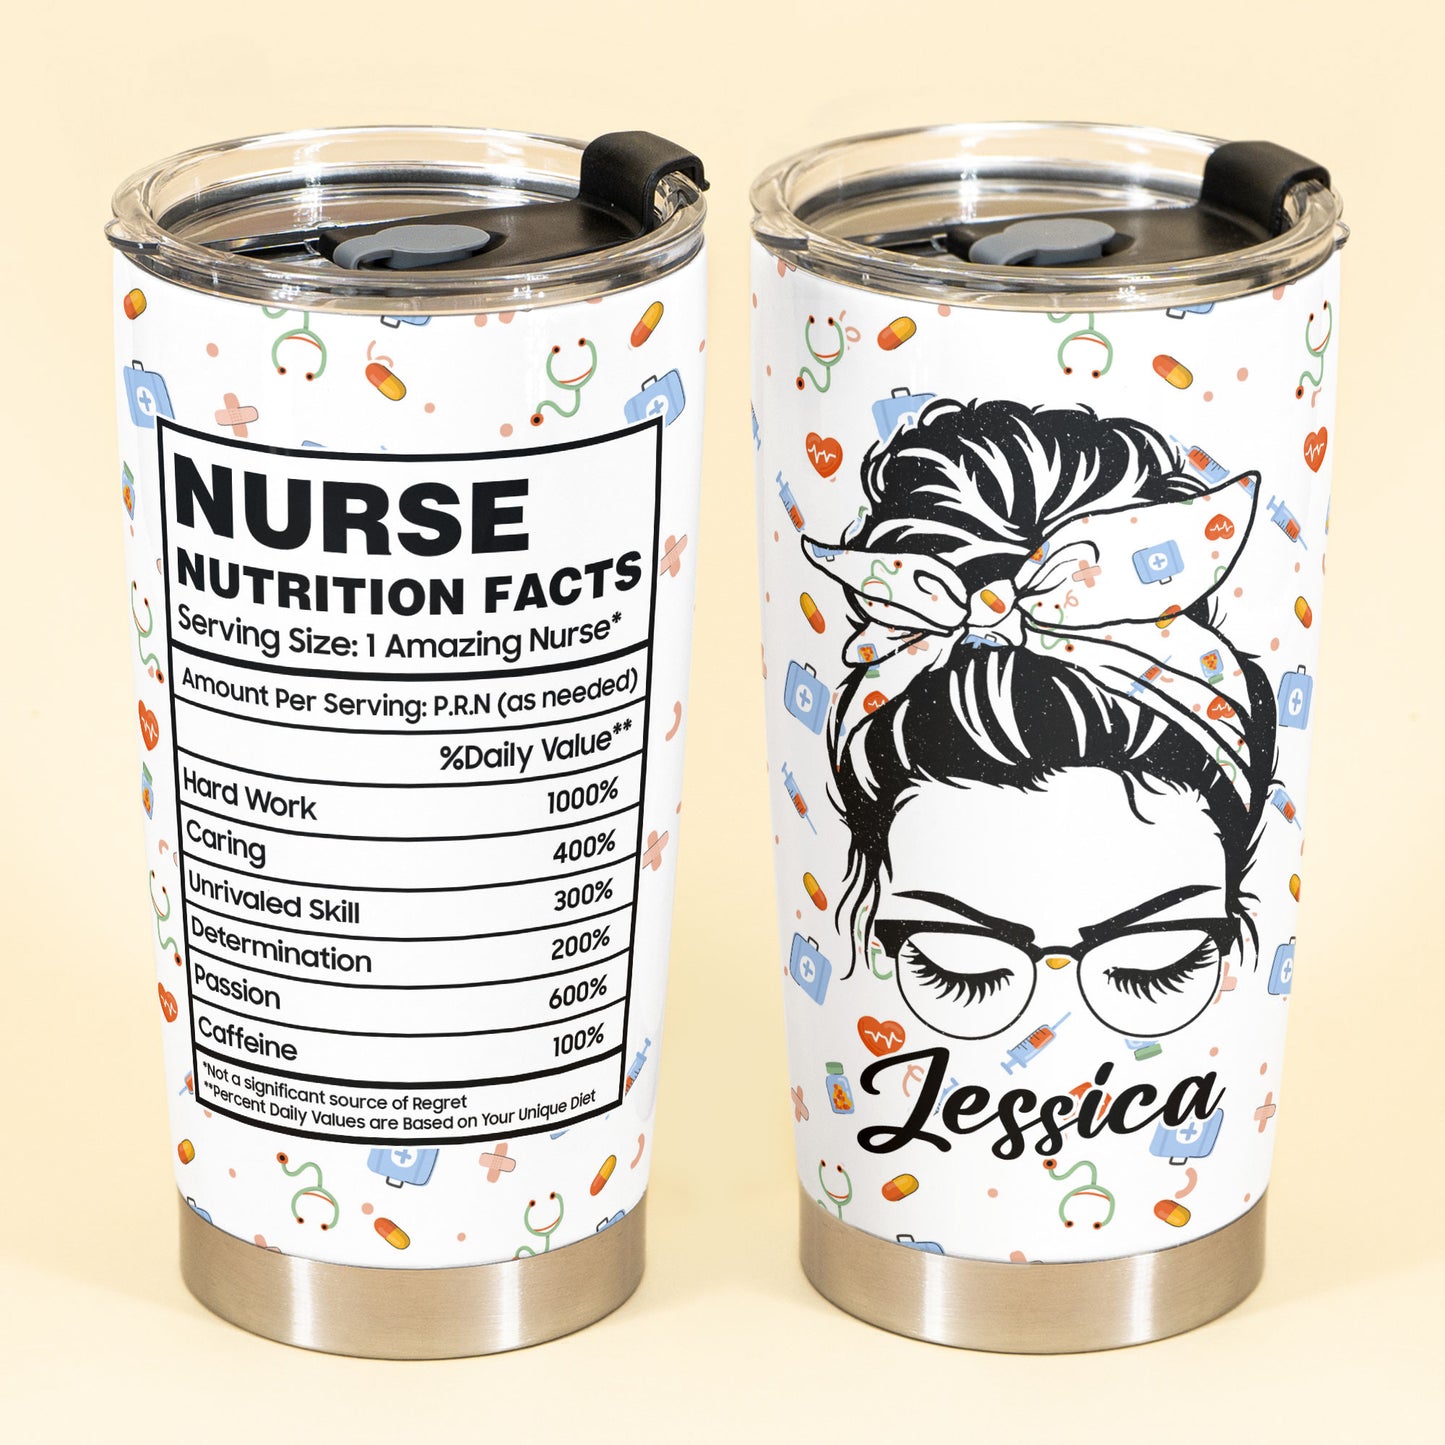 Nurse Life - Personalized Tumbler Cup - Birthday, Loving Gift For Nurse, Doctor, Medical Staff, Colleagues